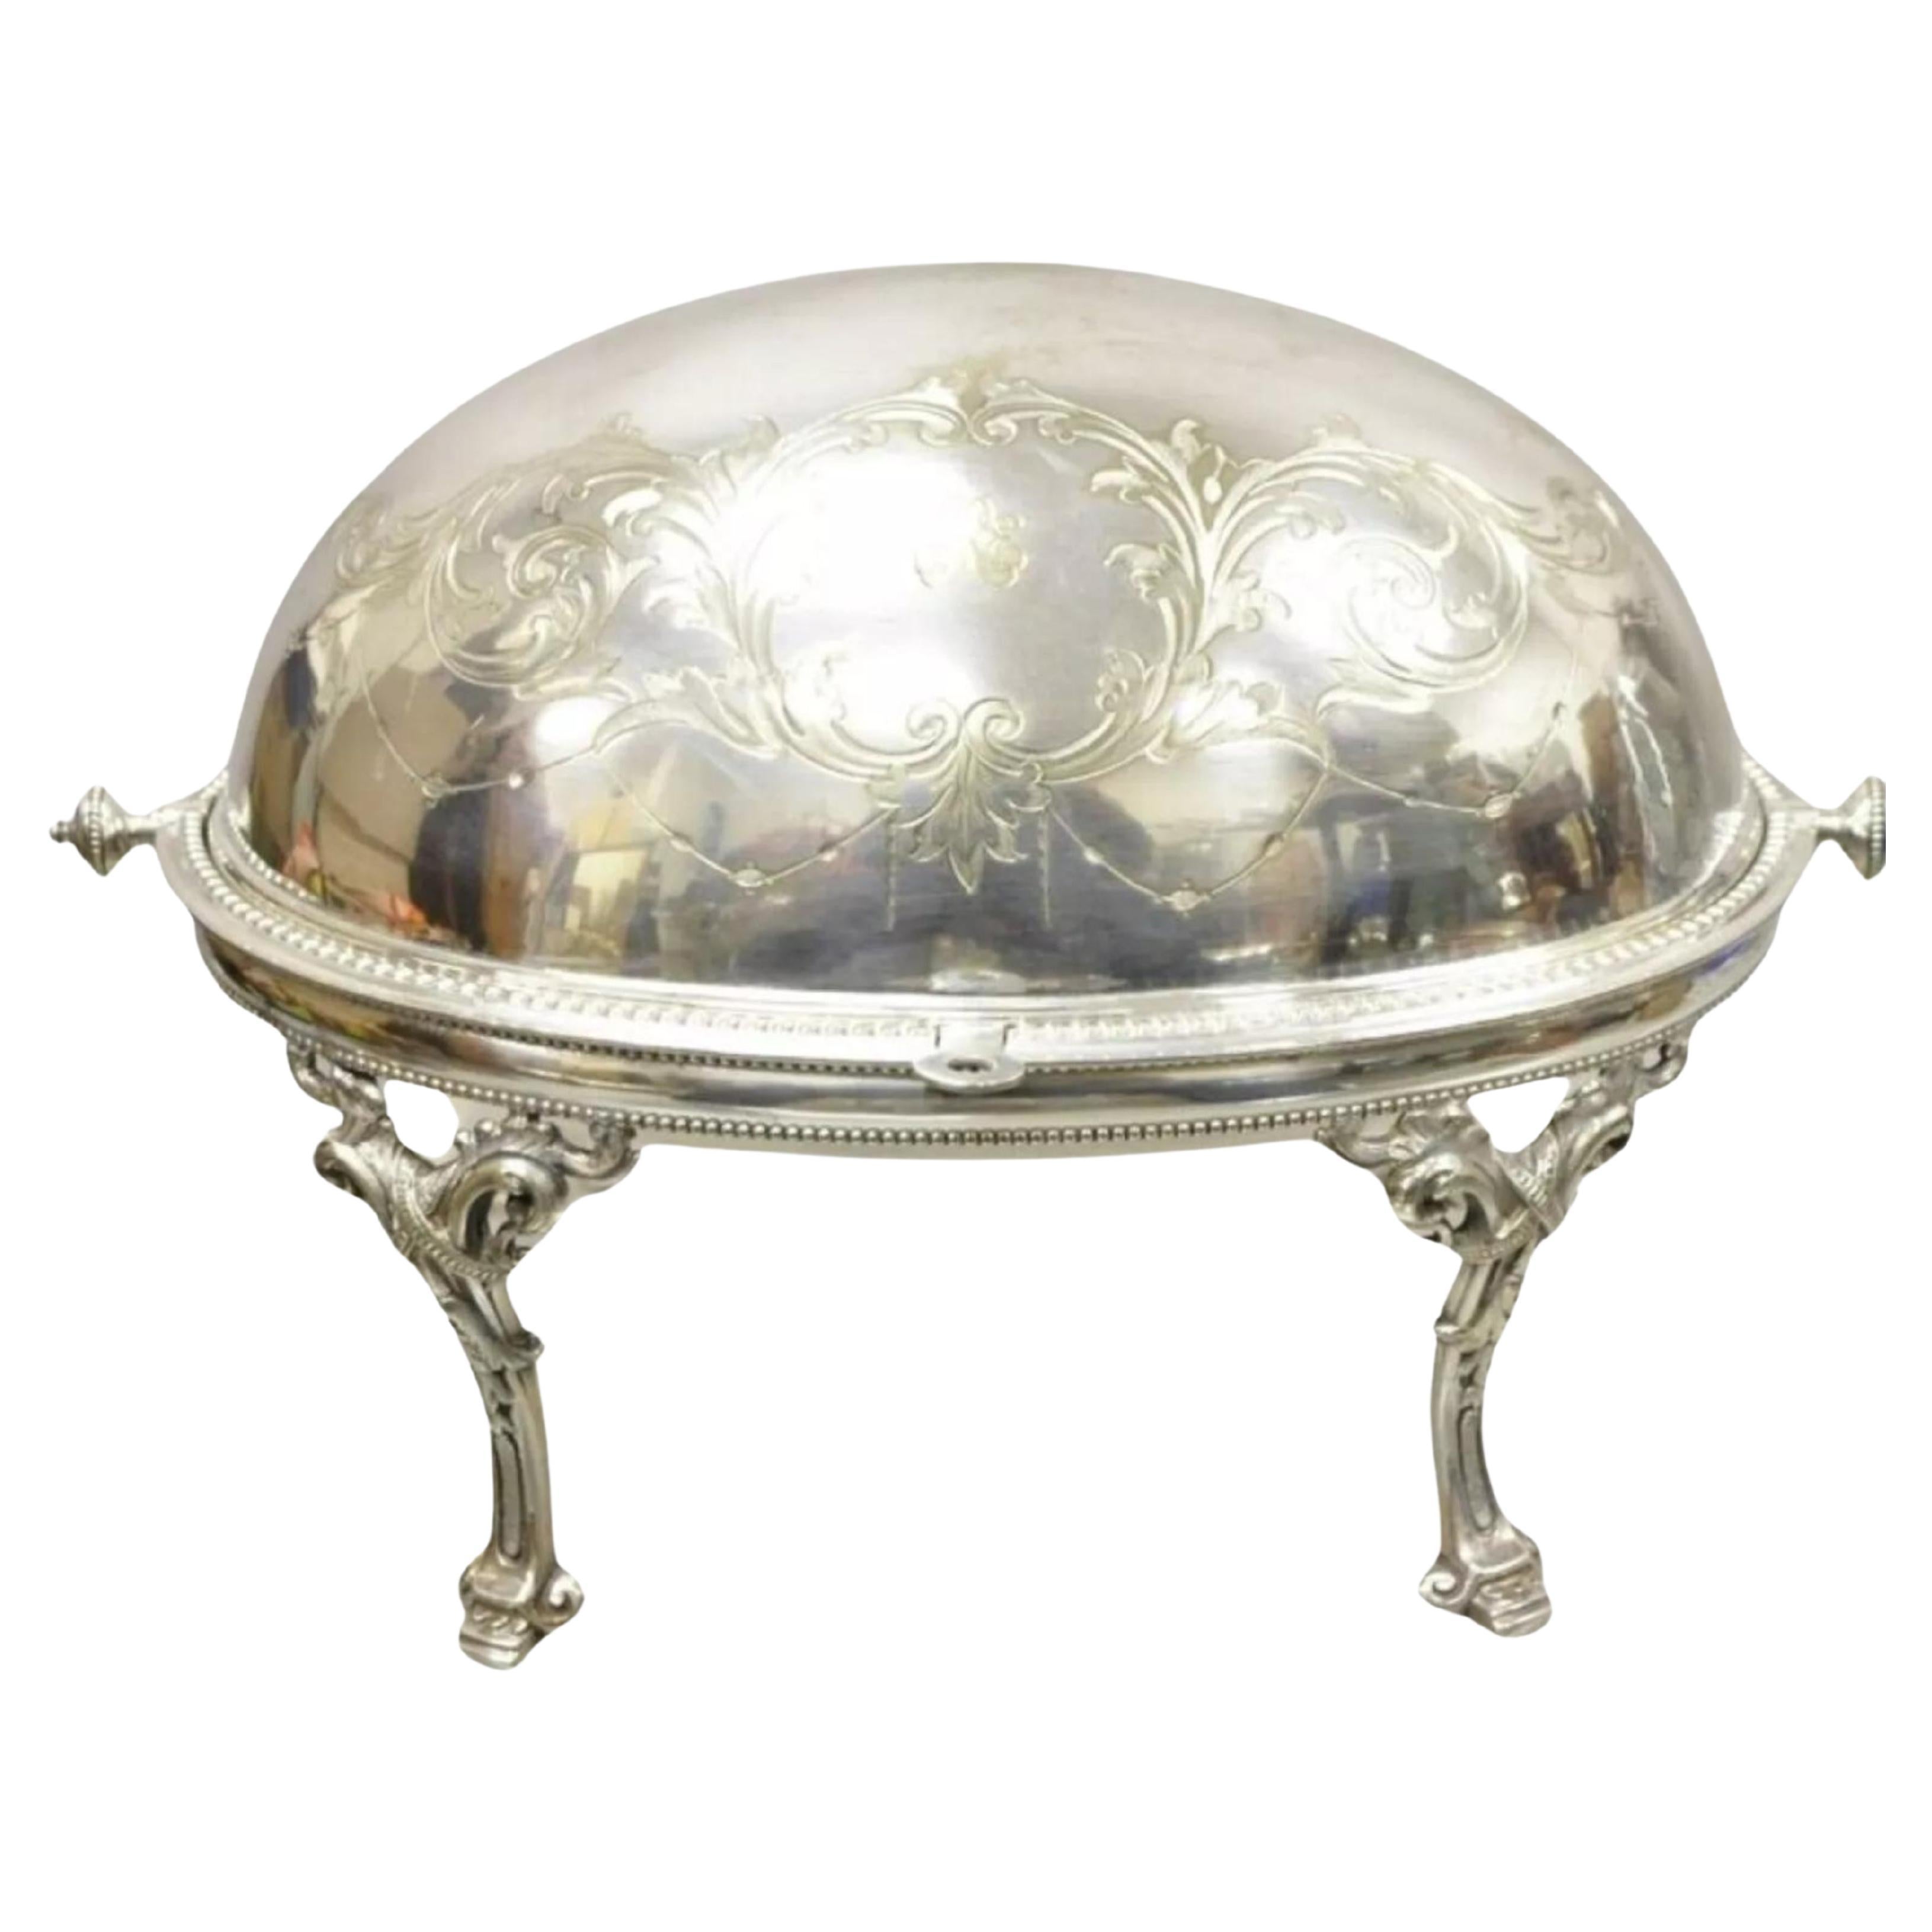 What is another name for a chafing dish?